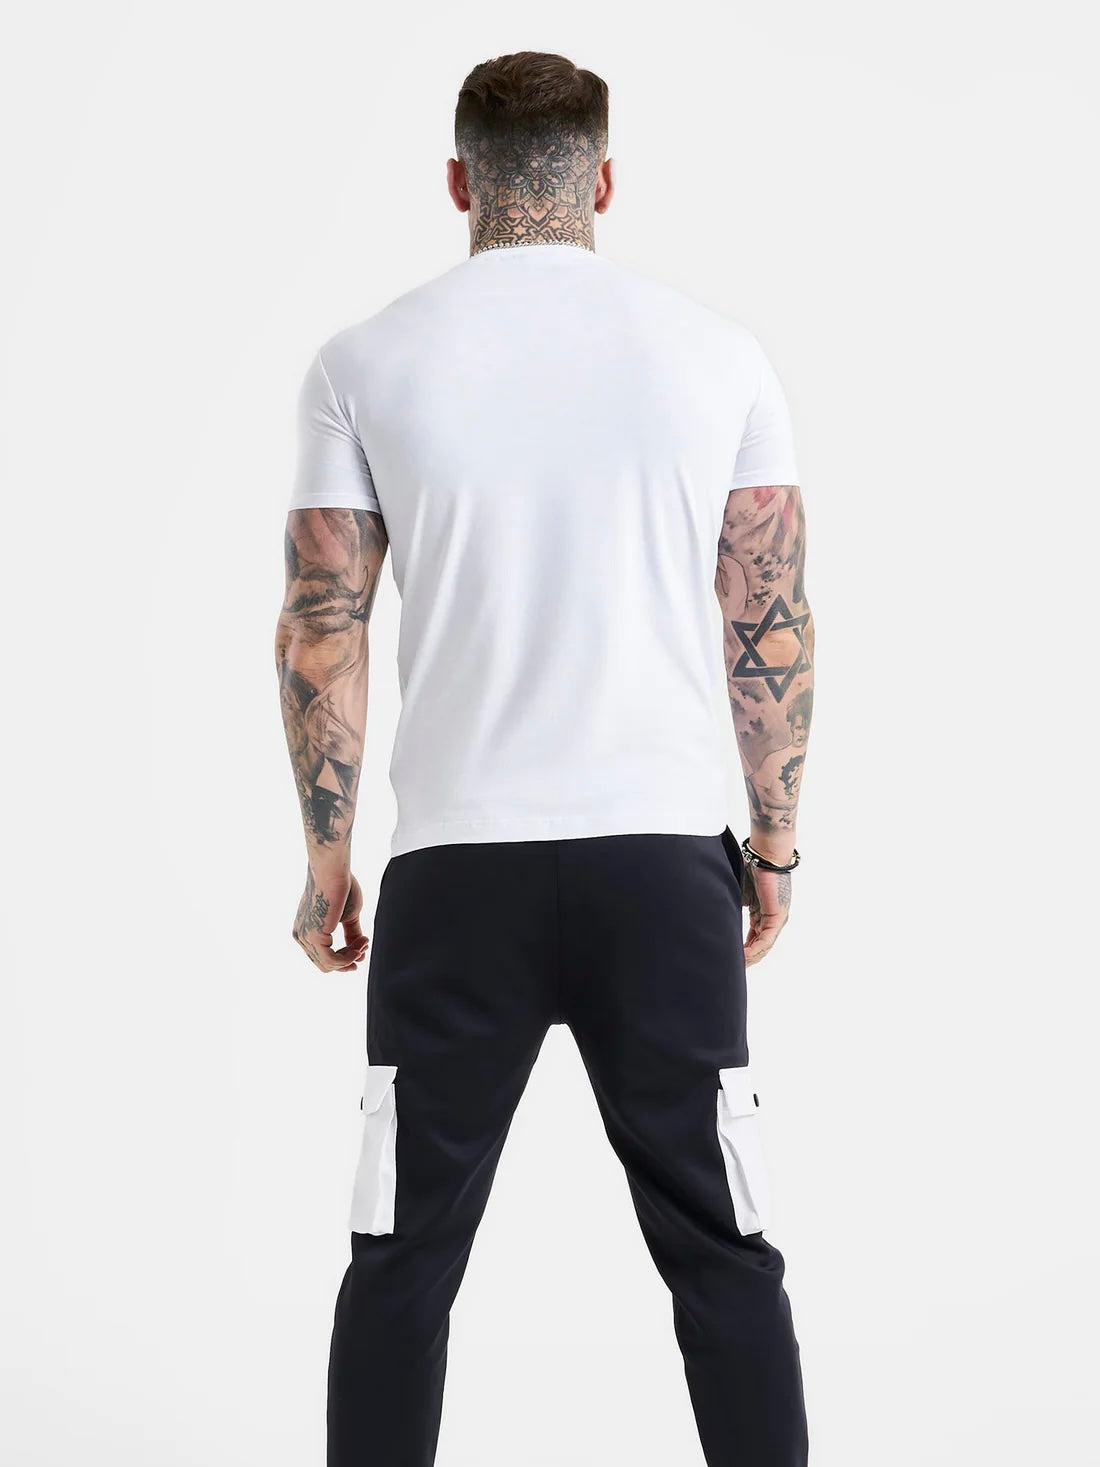 SikSilk - Essential Muscle fit white T-shirt